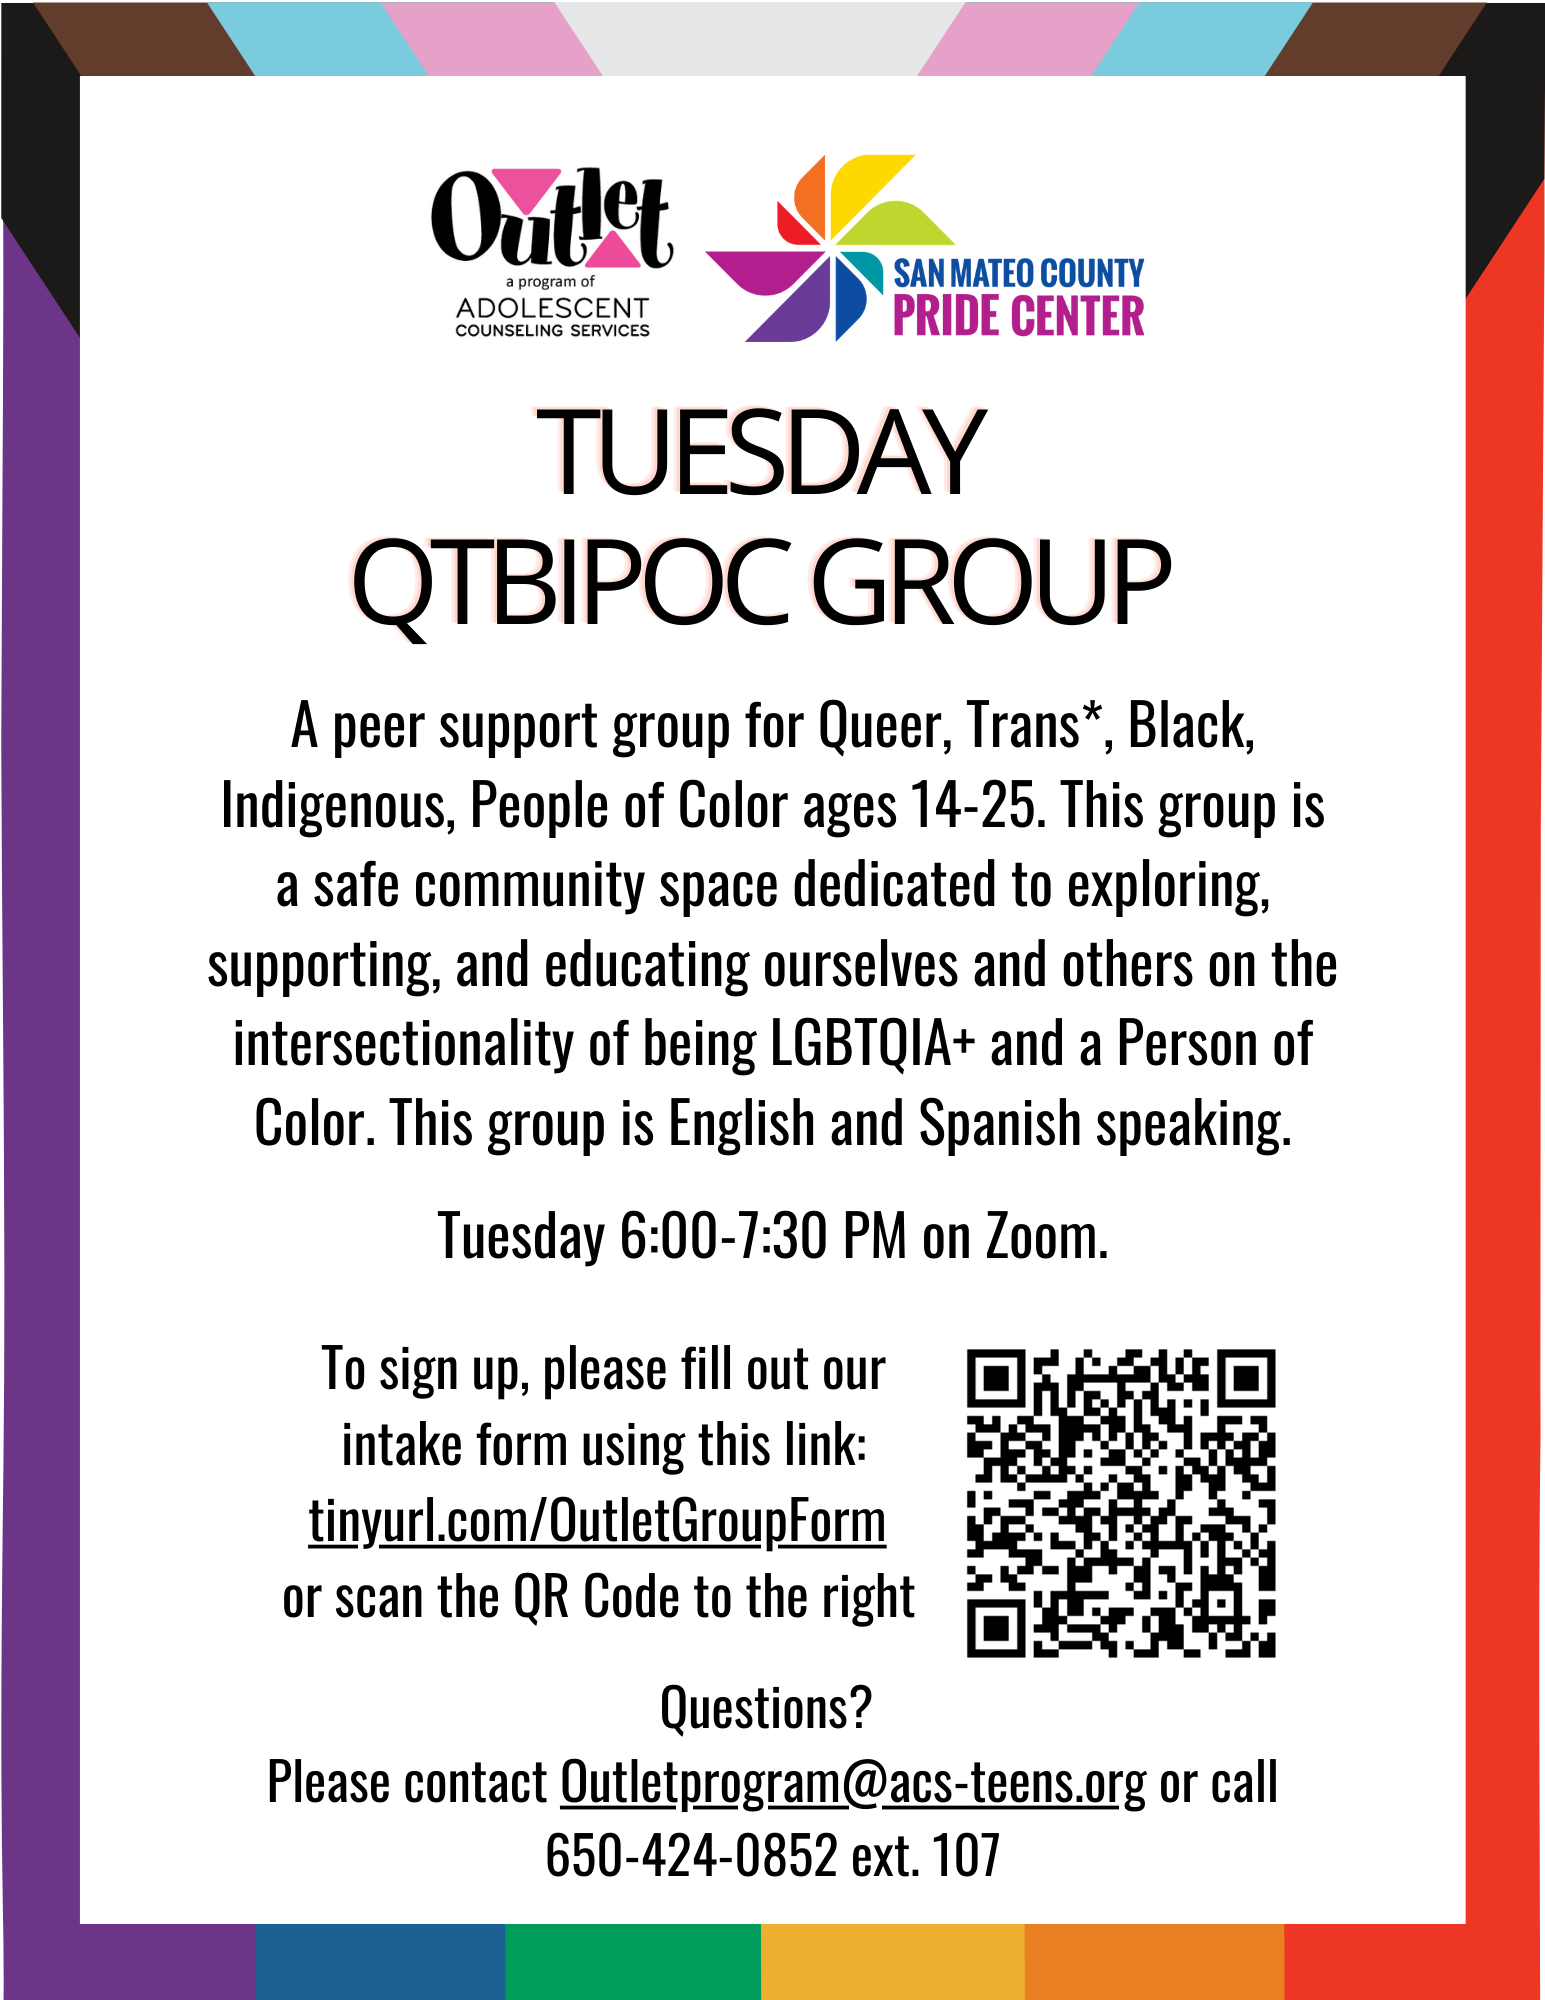 A poster for the queer, trans and black community group.